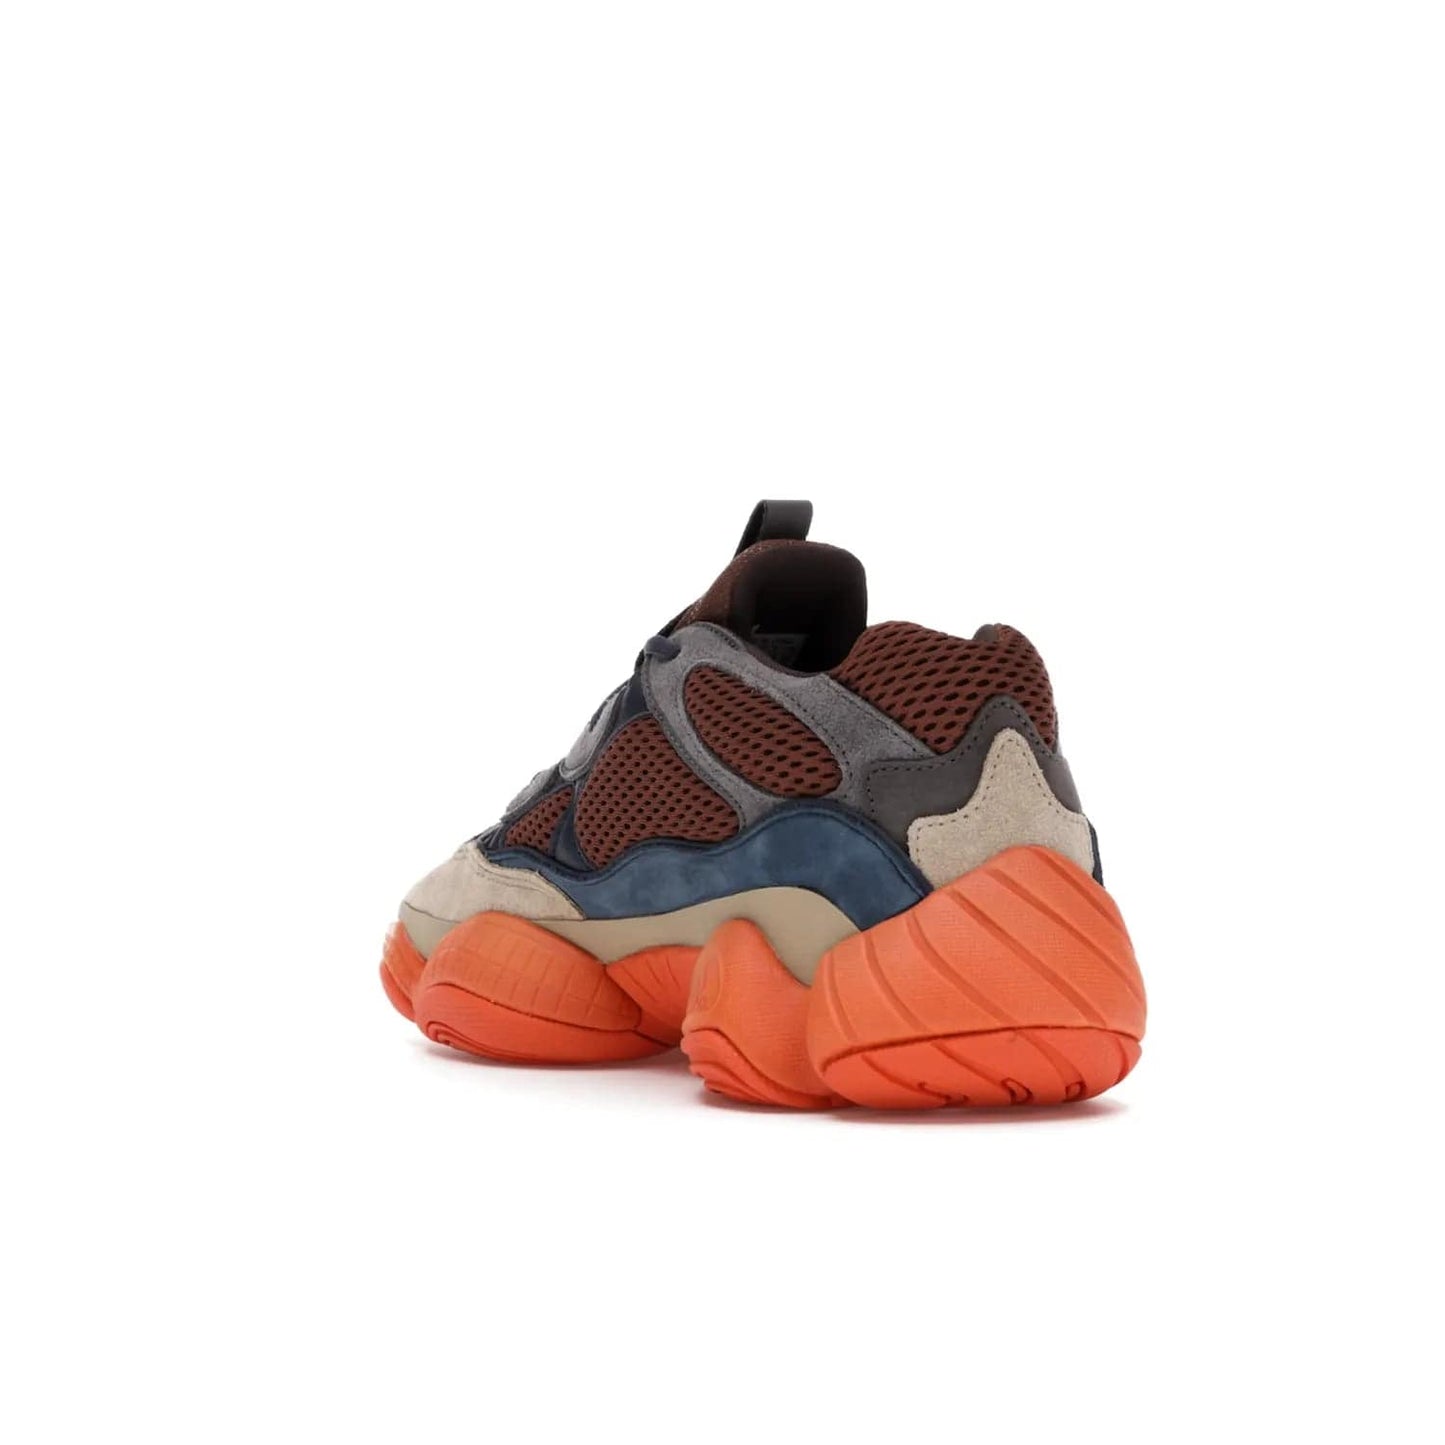 adidas Yeezy 500 Enflame - Image 25 - Only at www.BallersClubKickz.com - Step into style with the adidas Yeezy 500 Enflame. Mix of mesh, leather, and suede layered together to create tonal-brown, dark blue, & orange. Orange AdiPRENE sole provides superior cushioning & comfort. Get yours and experience maximum style.